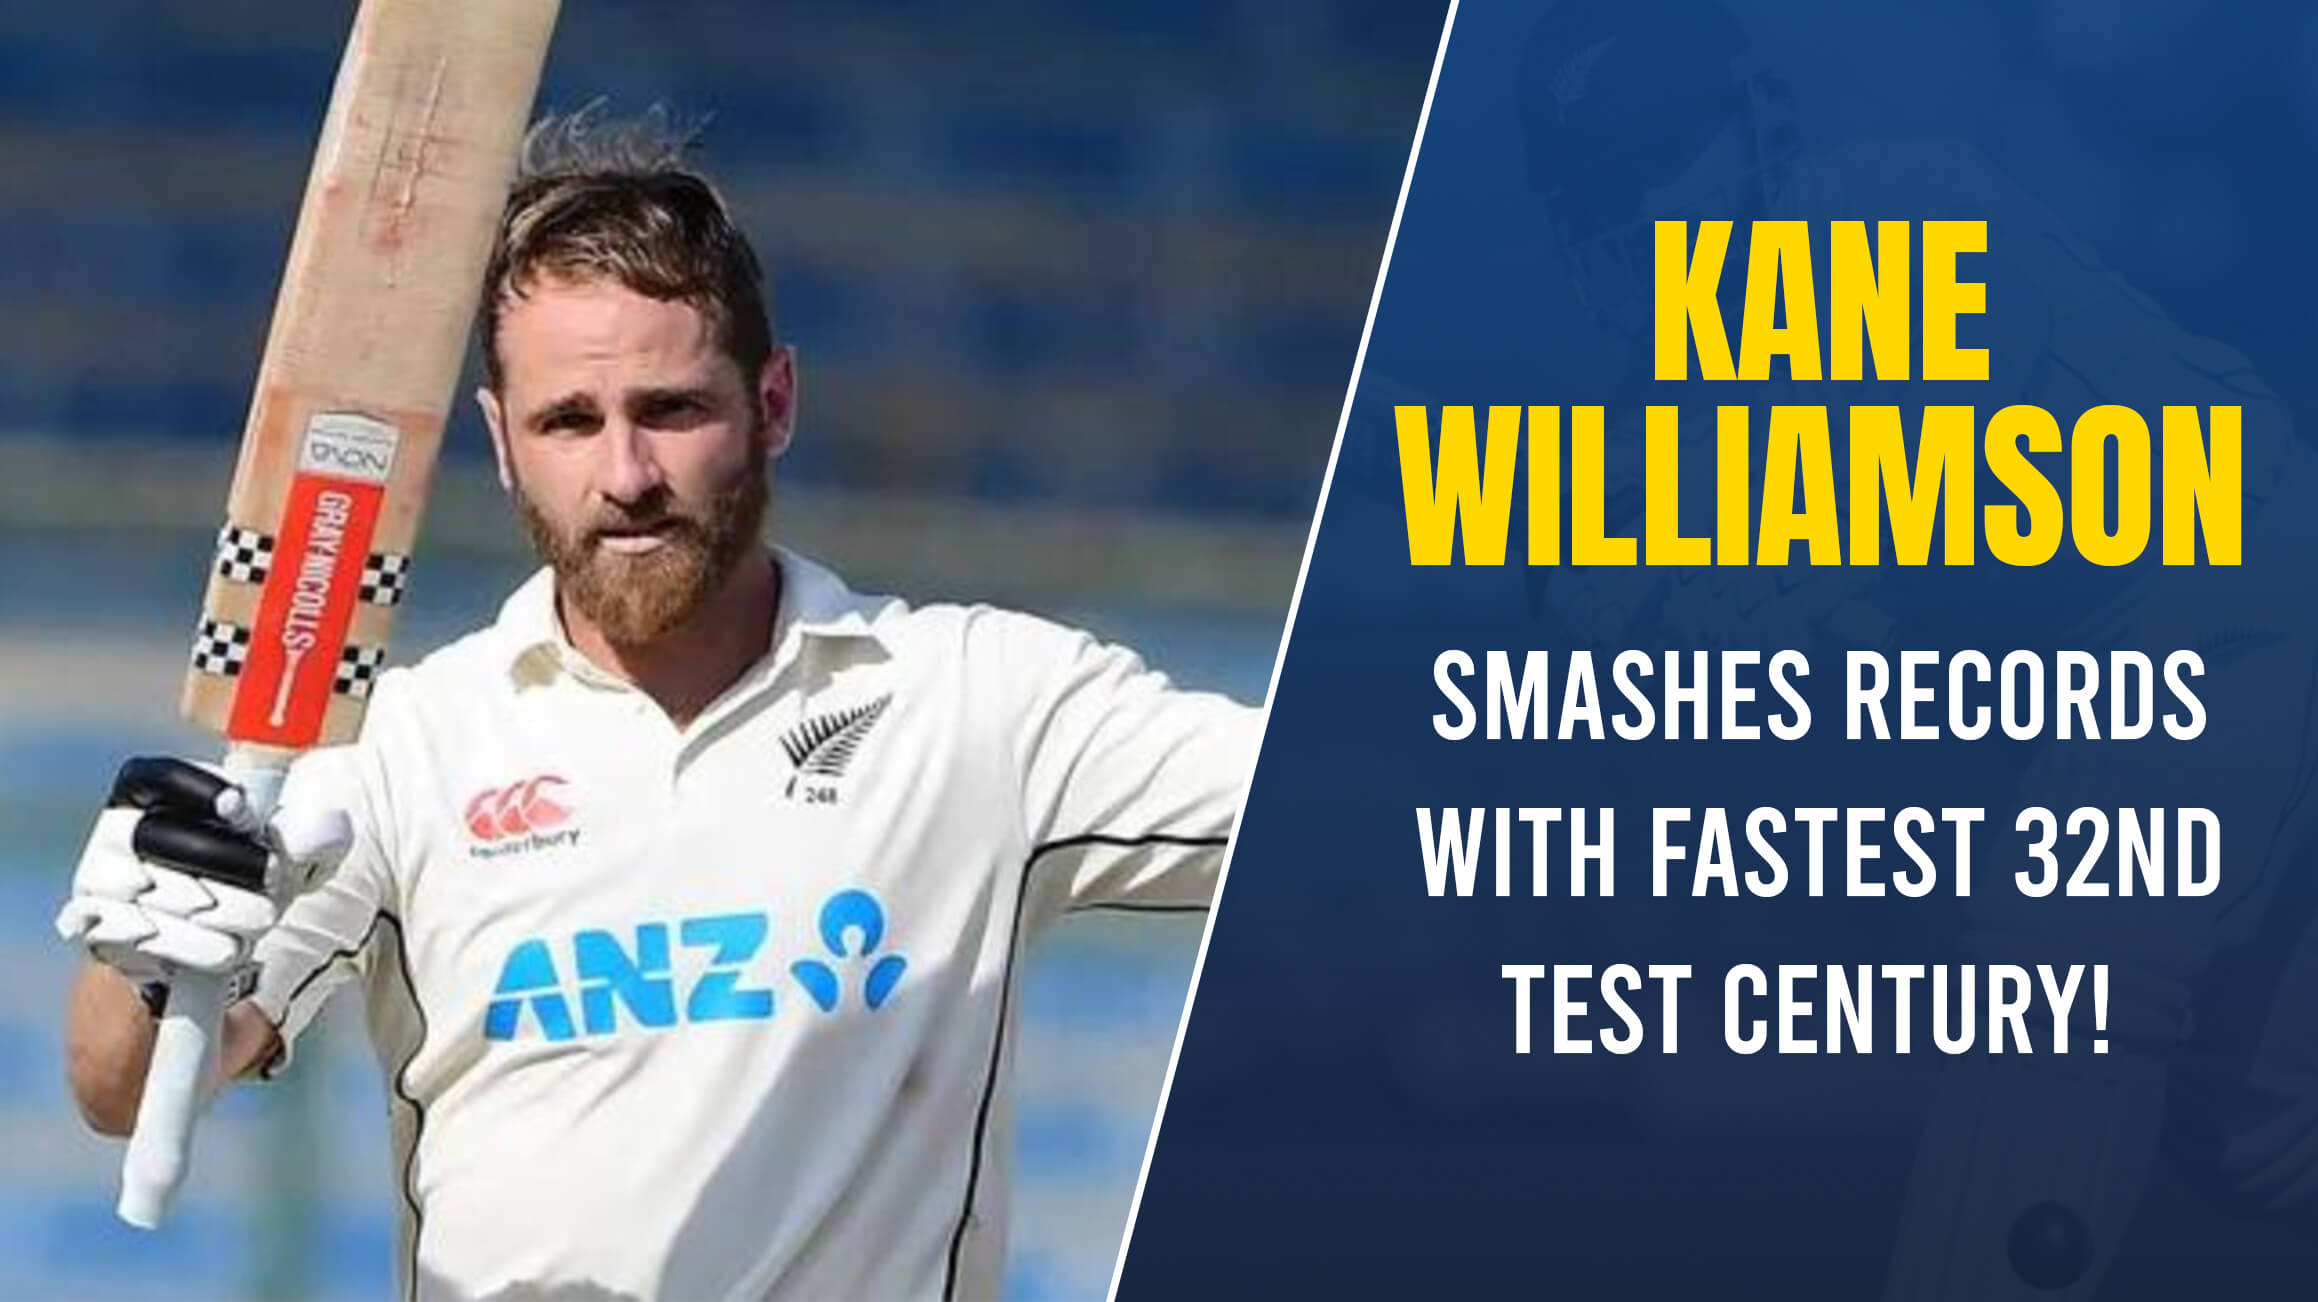 Kane Williamson Smashes Records with Fastest 32nd Test Century!